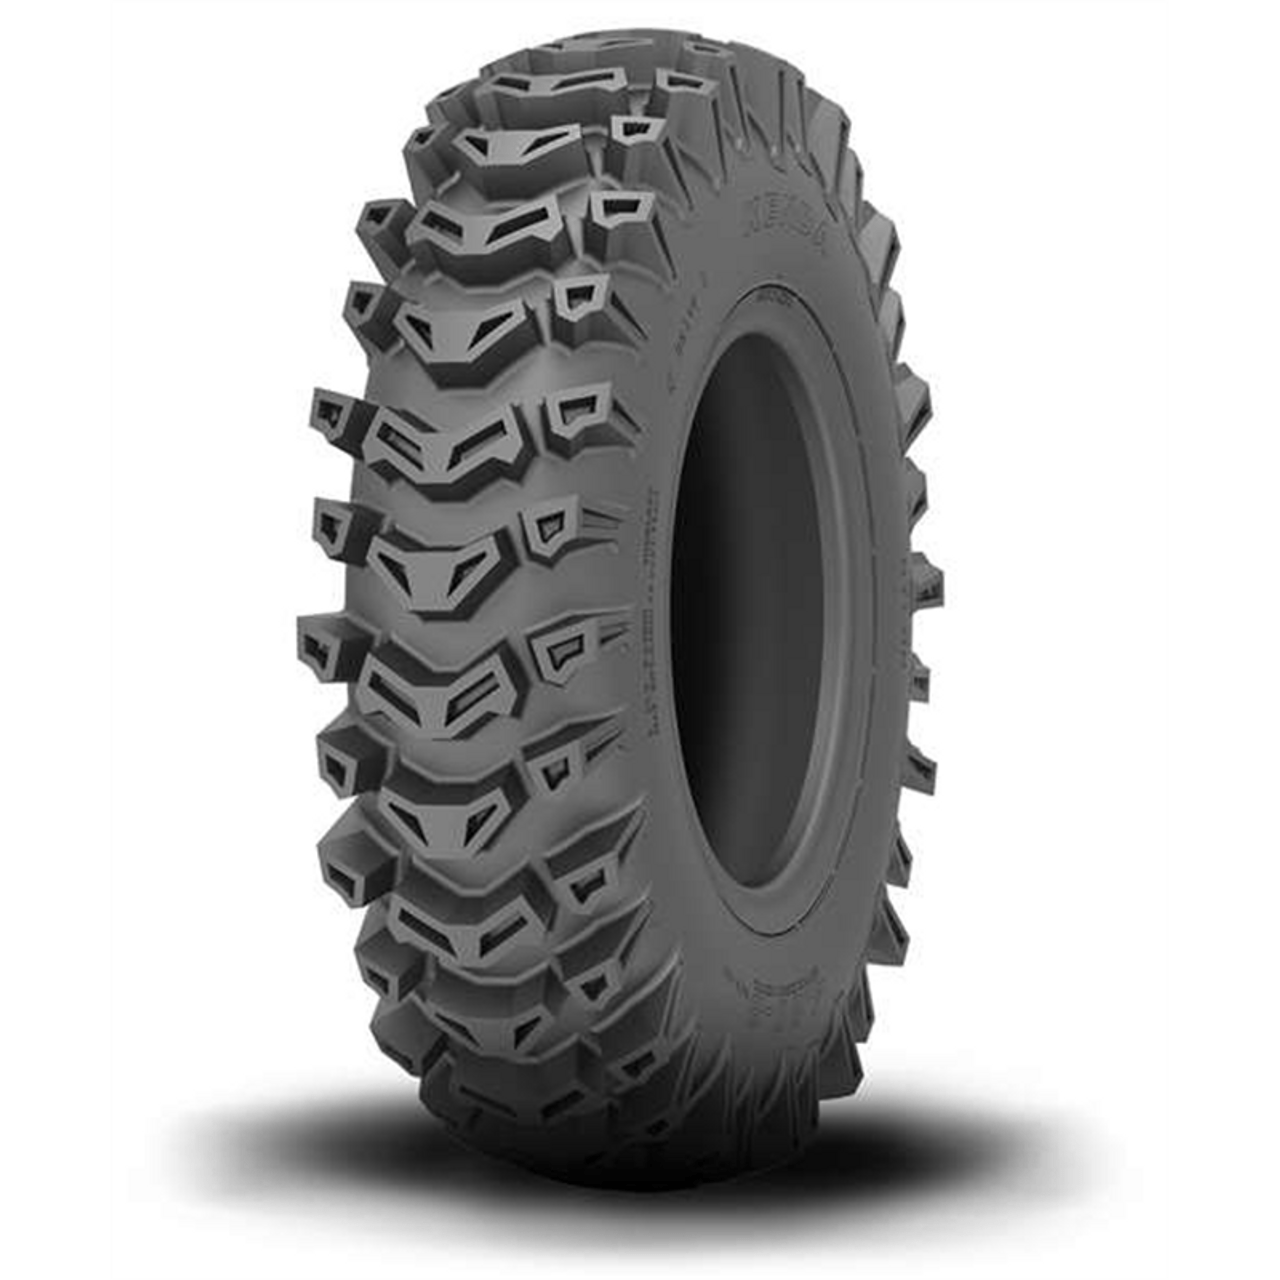 This replacement Directional Trac tire will fit select Ariens COMPACT, CLASSIC, DELUXE, PLATINUM, and POWER BRUSH models.